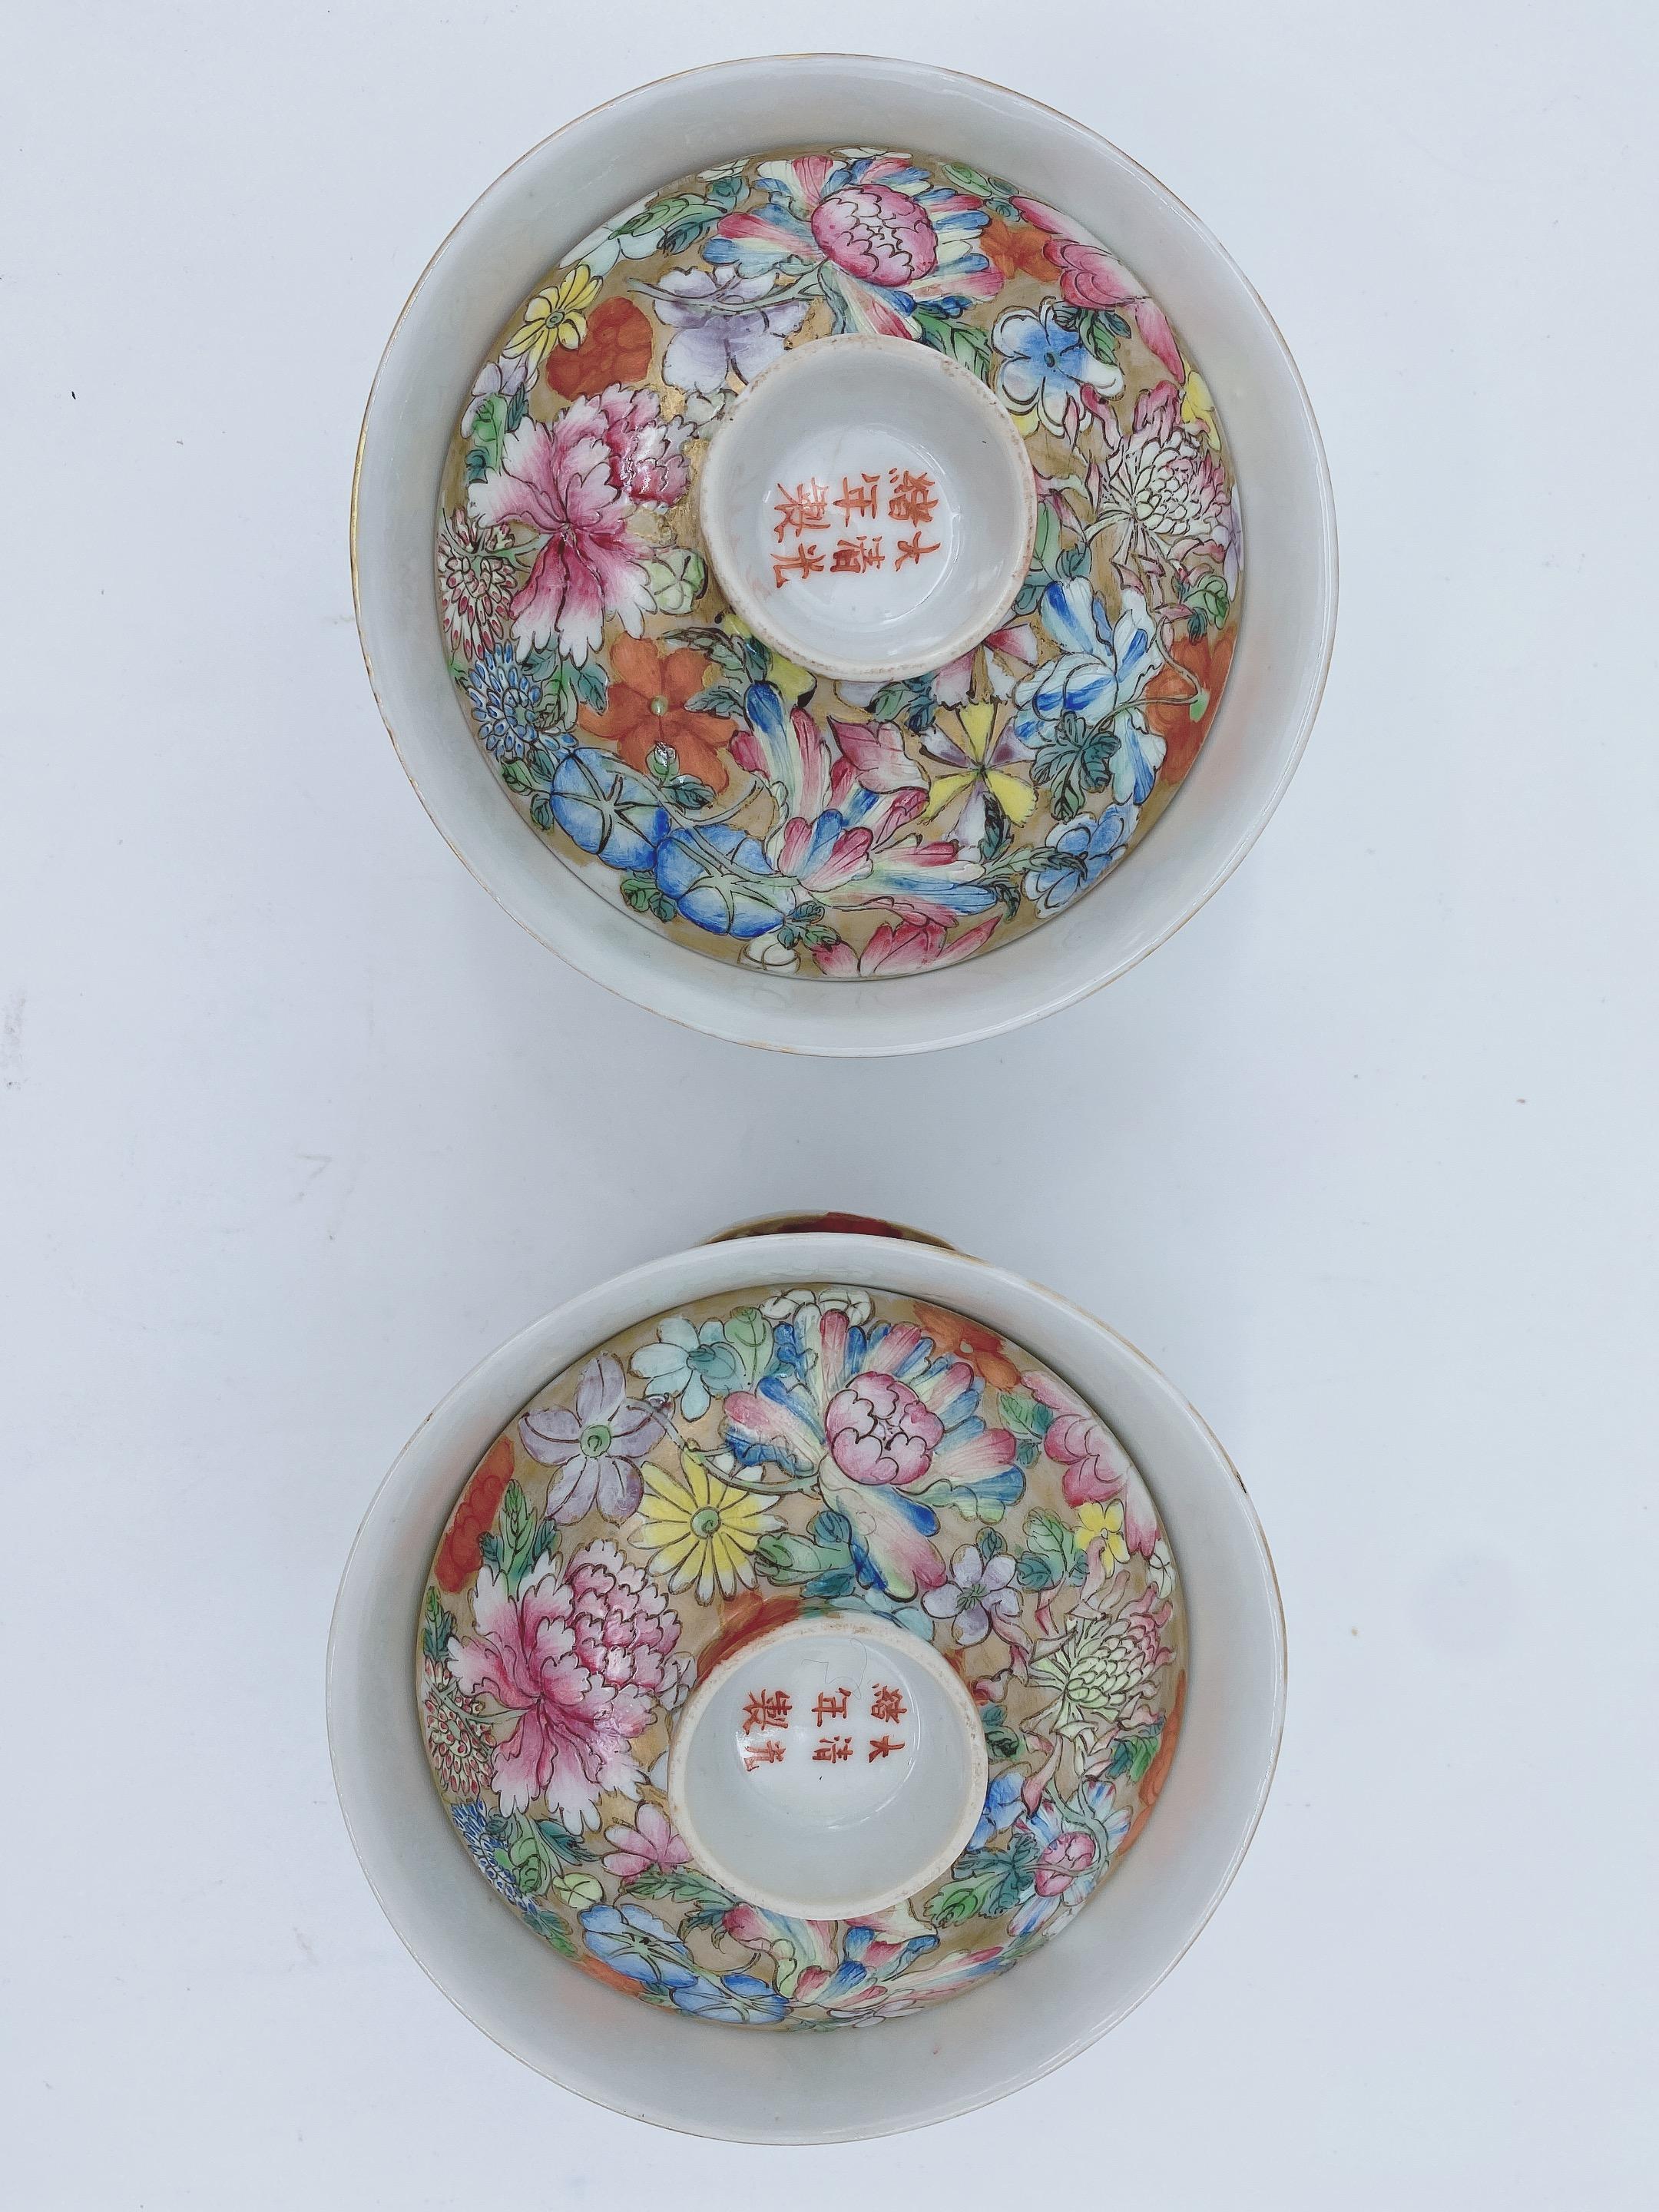 A pair of 19th century Chinese flower-blossom porcelain cups with cover and base, the cups and covers marked with red Daqing GuangXu NianZhi, measures: opening diameter 4.25 inch. Inside cups with 5 bats and shou.